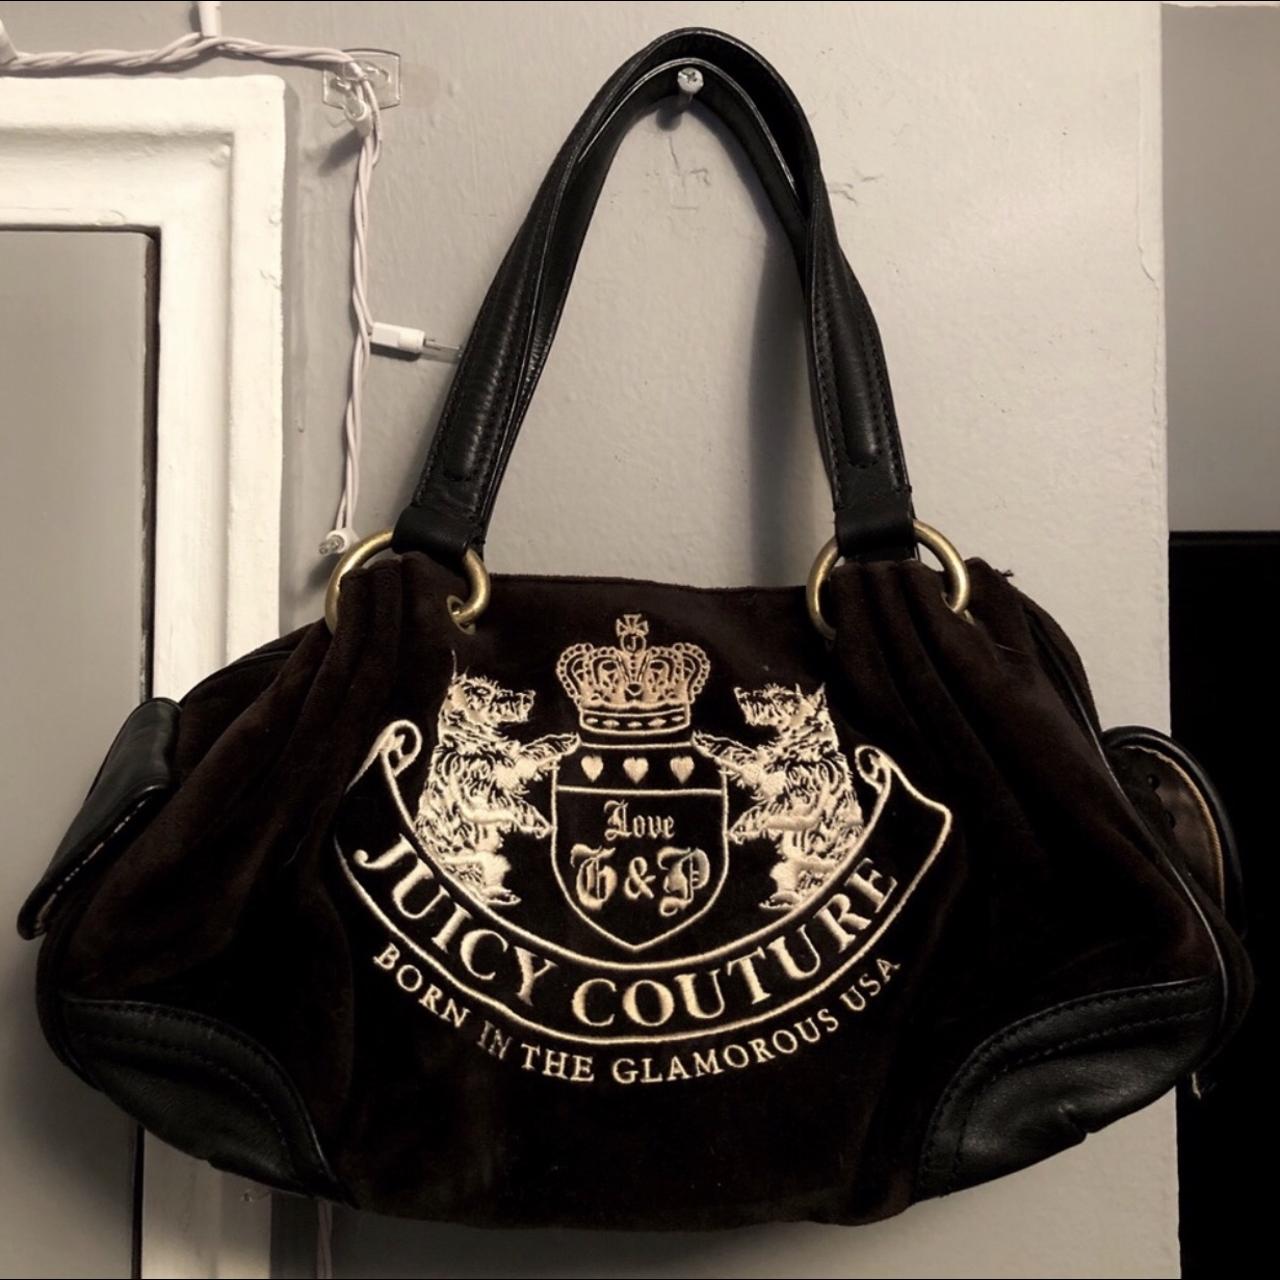 Juicy Couture Women's Bags | Stylicy India